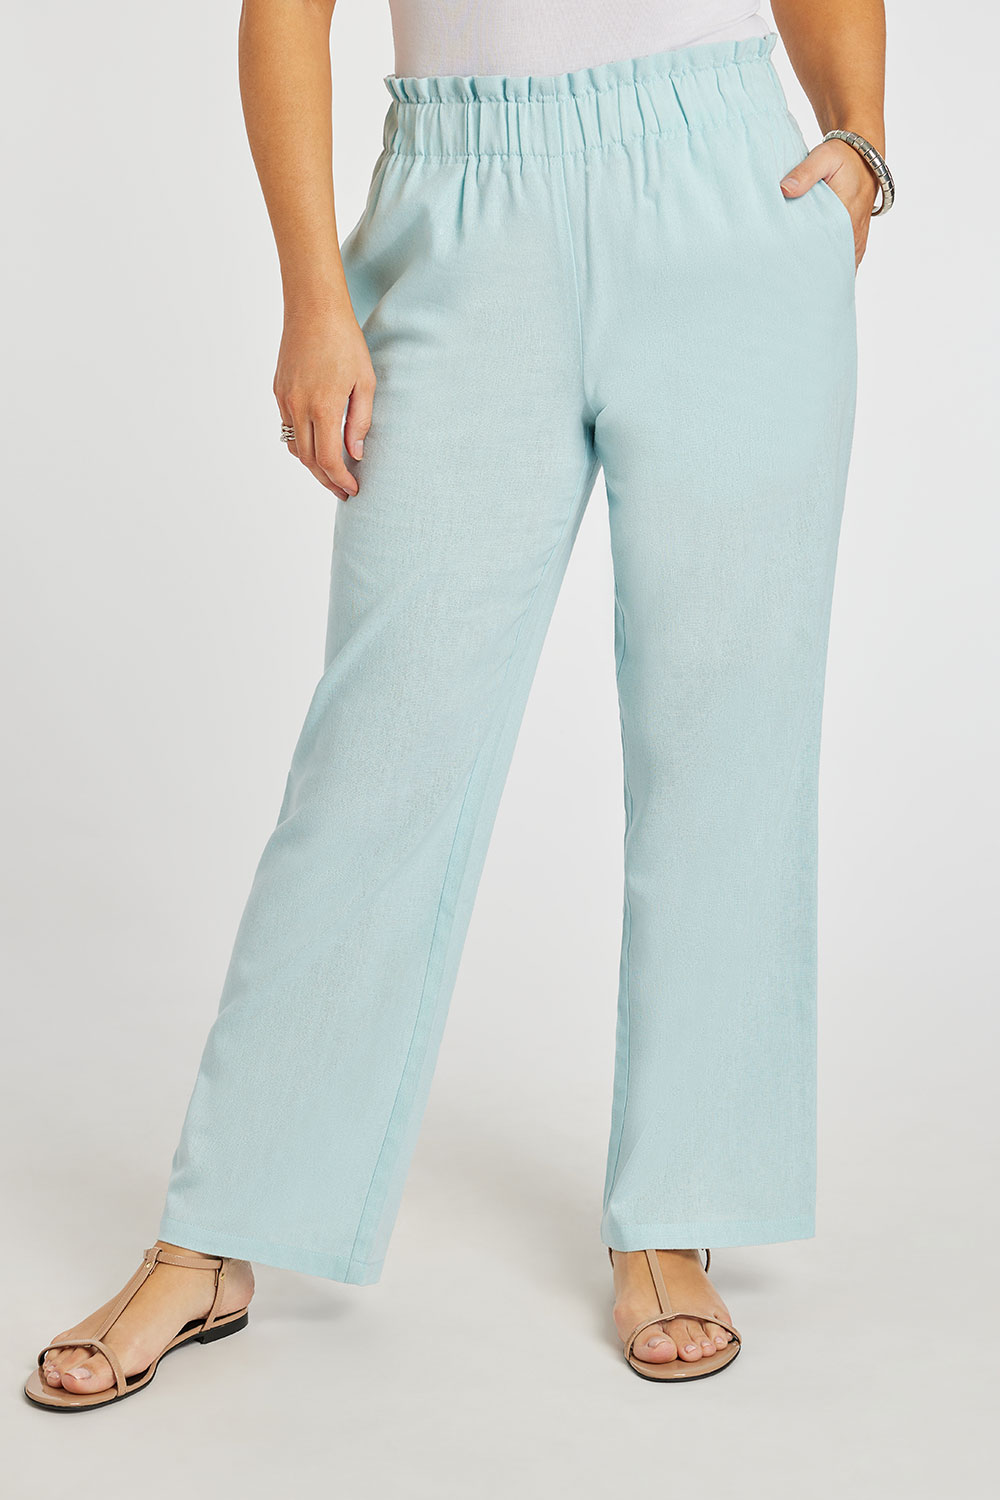 Ladies Light Linen Pants/trousers With Elastic Waistband and Side